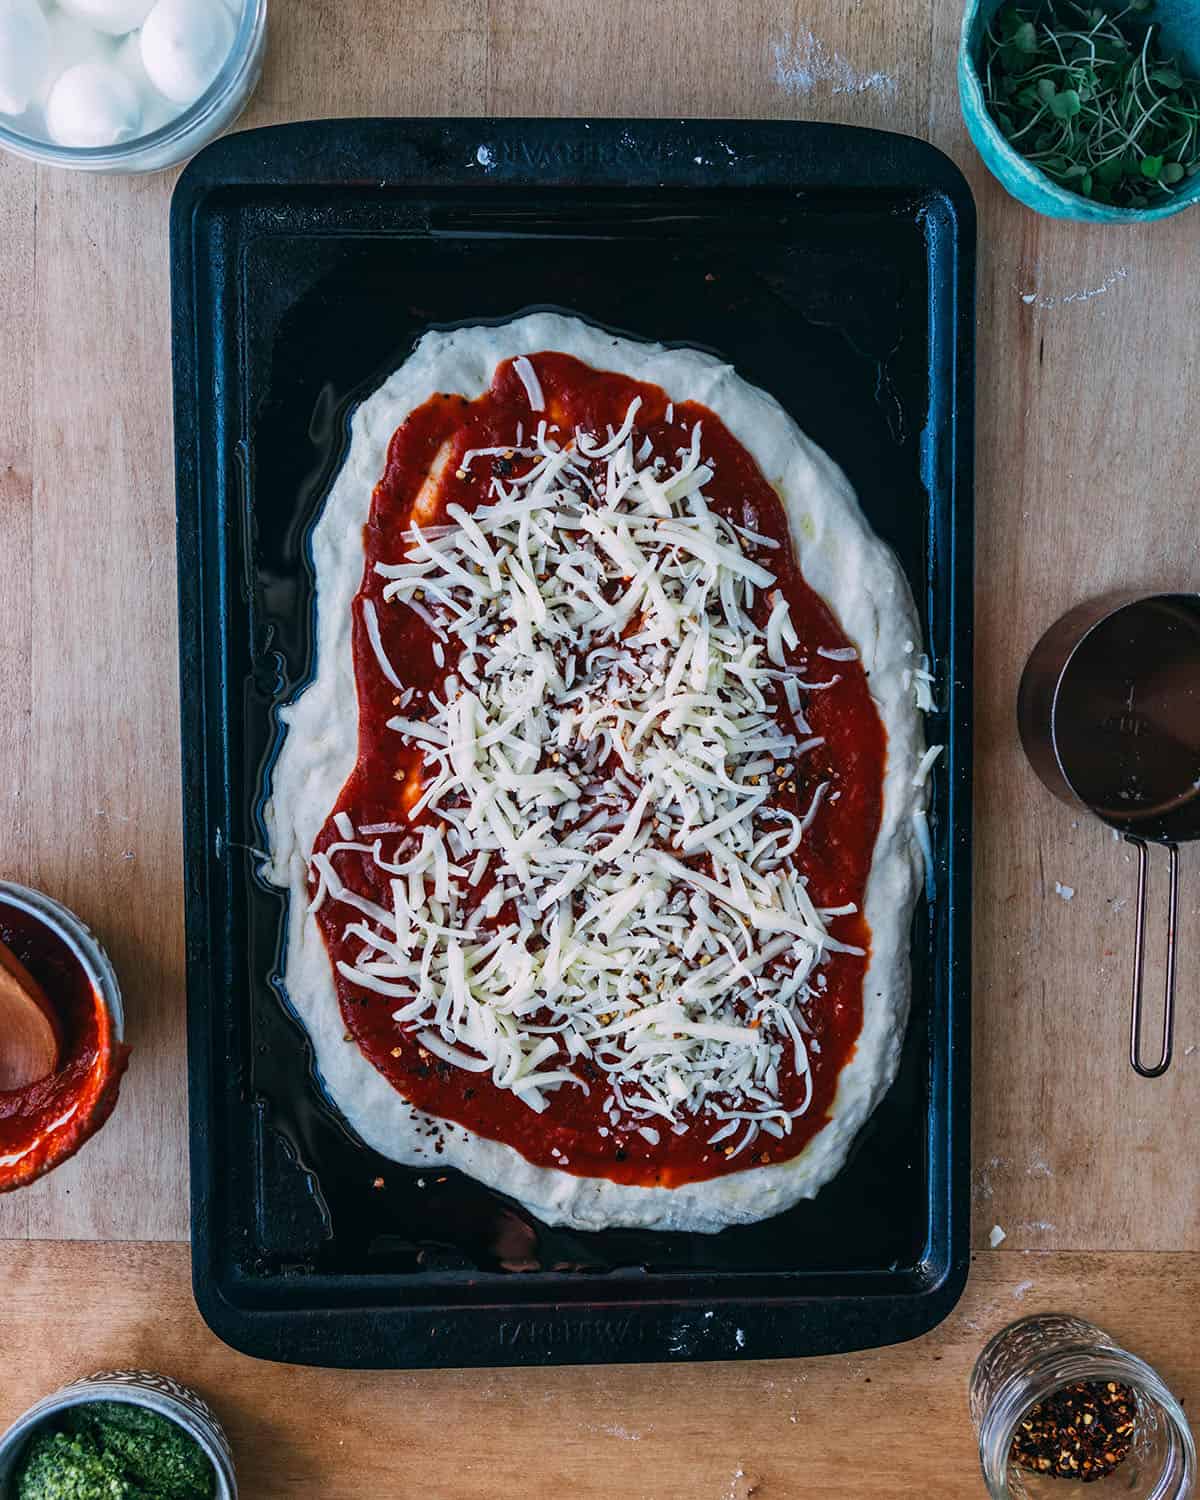 Sourdough pizza dough with red sauce and cheese on it. 